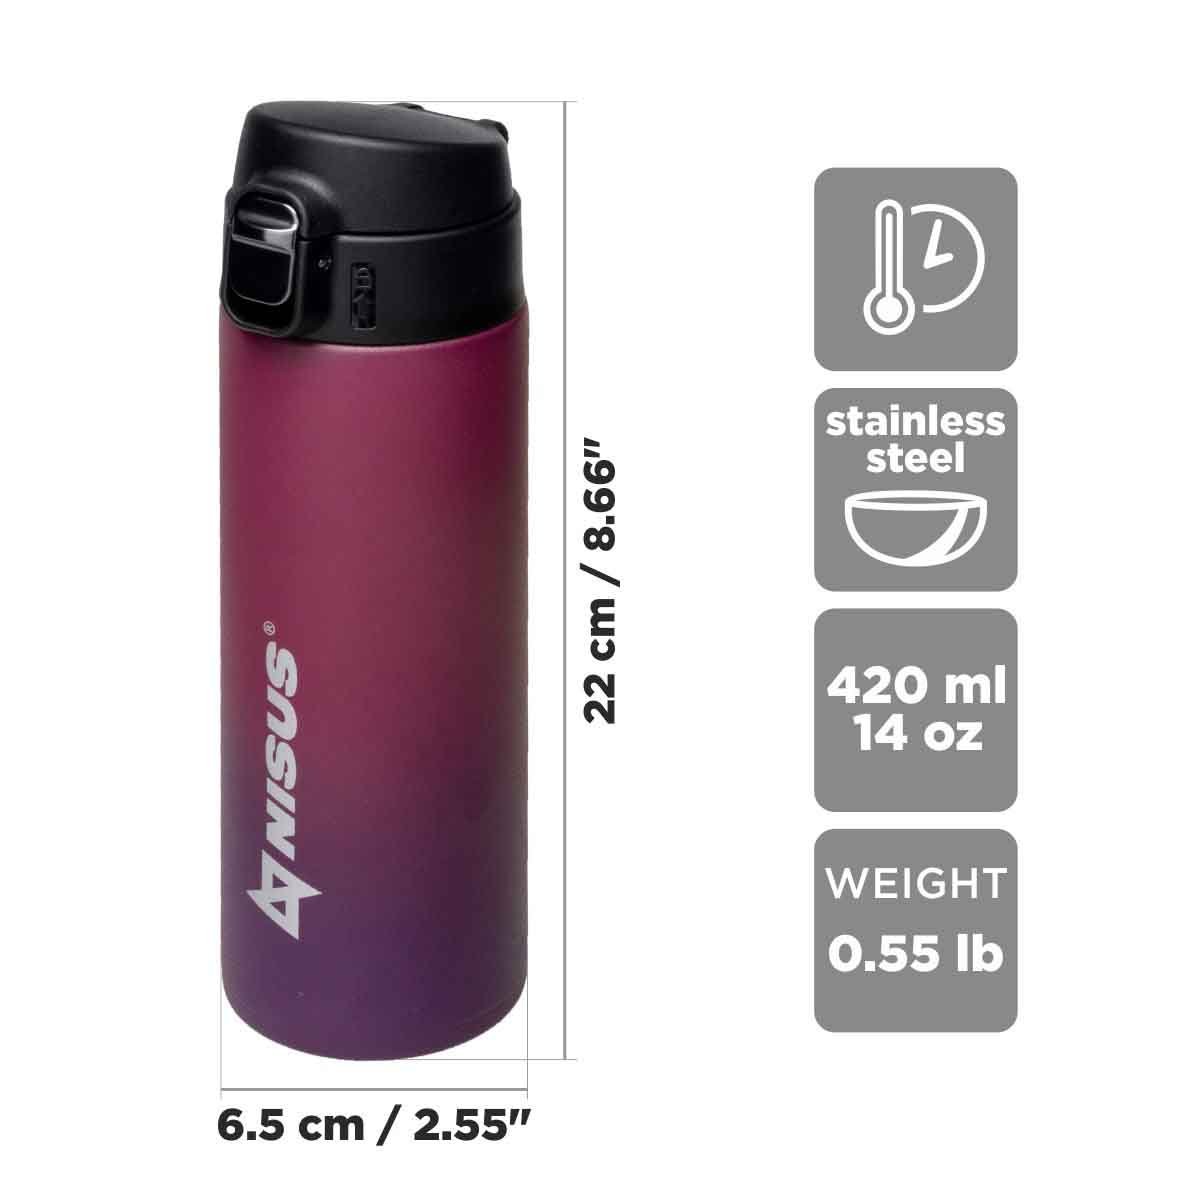 Compact Stainless Steel Insulated Water Bottle, Red, 14 oz is 8.7 inches high, 2.6 inches wide, weighing only 0.55 lbs